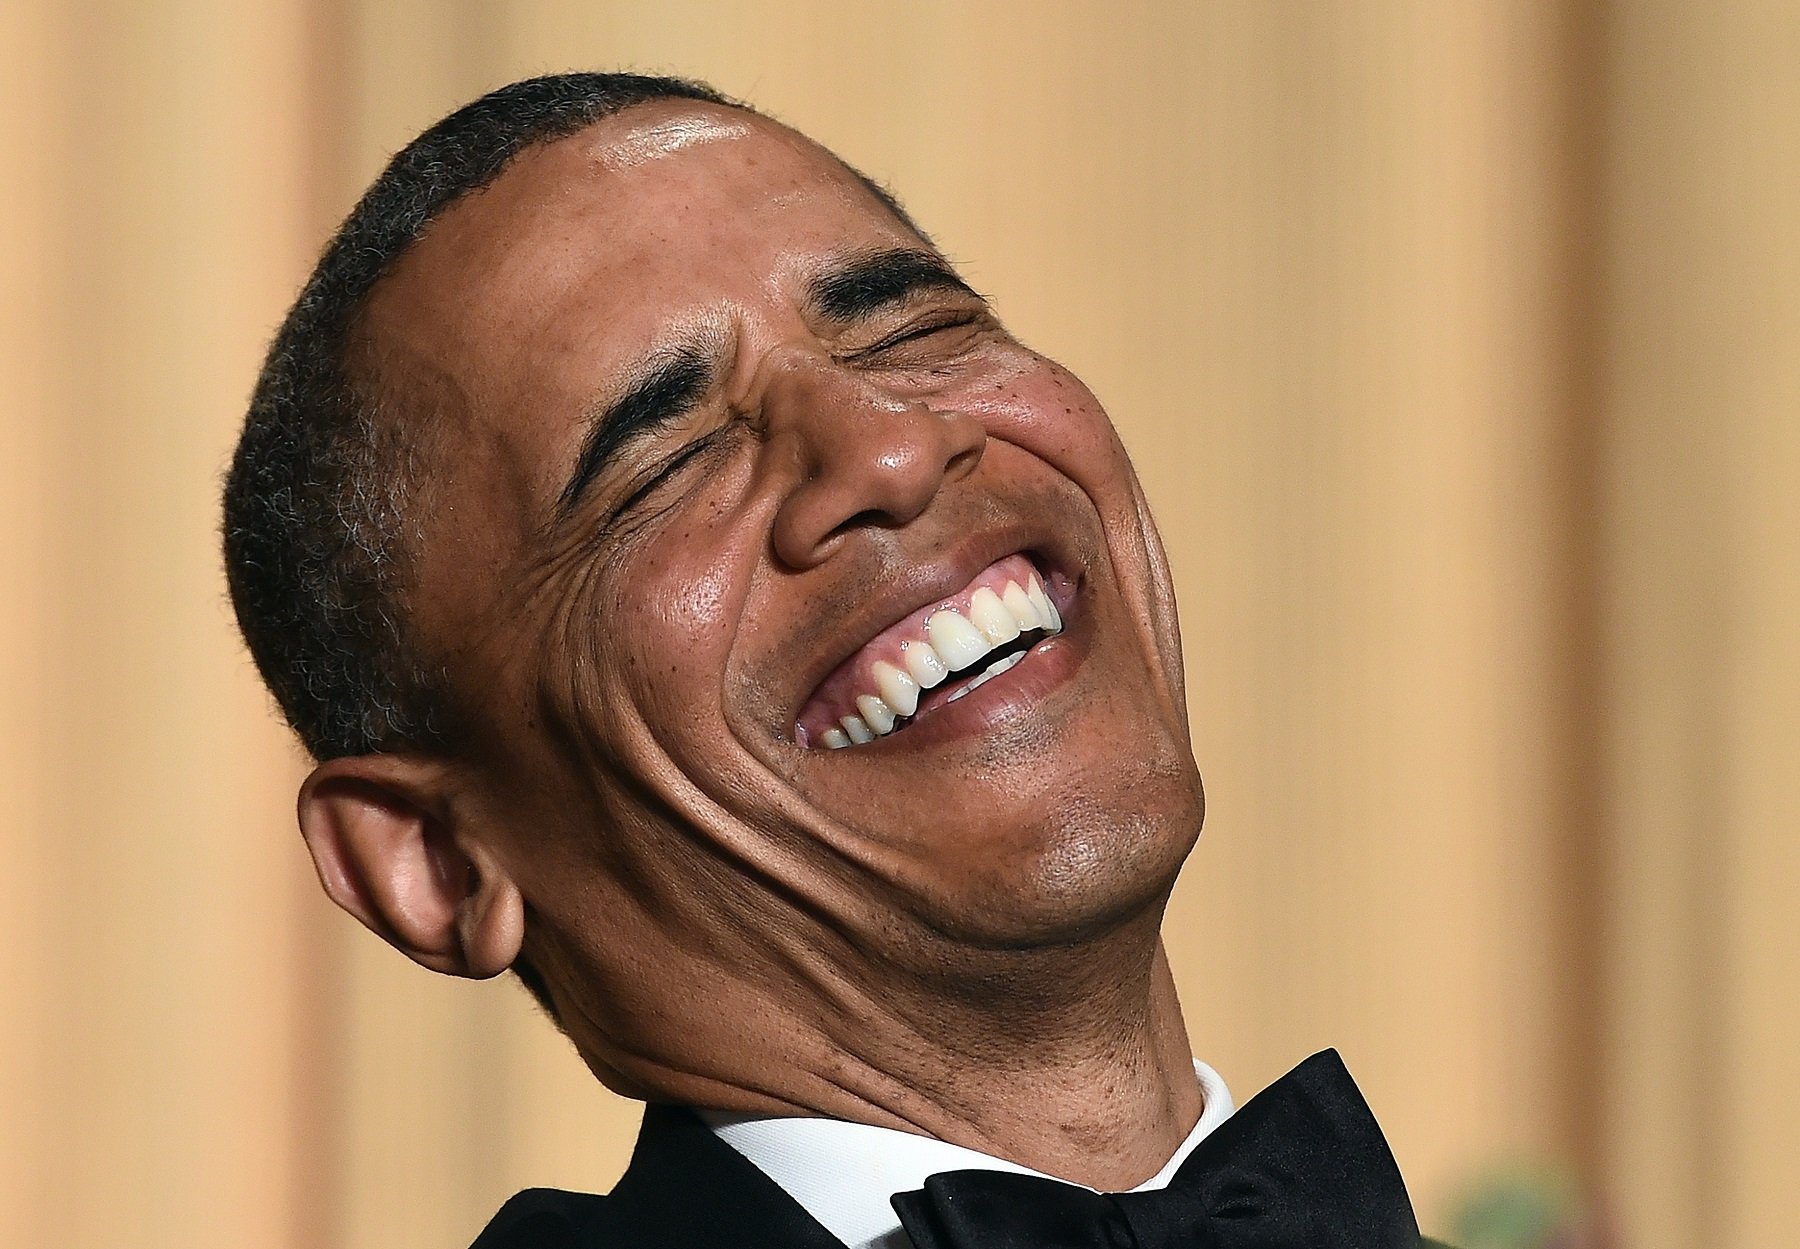 Obama laughing Getty Images/Jewel Samad 